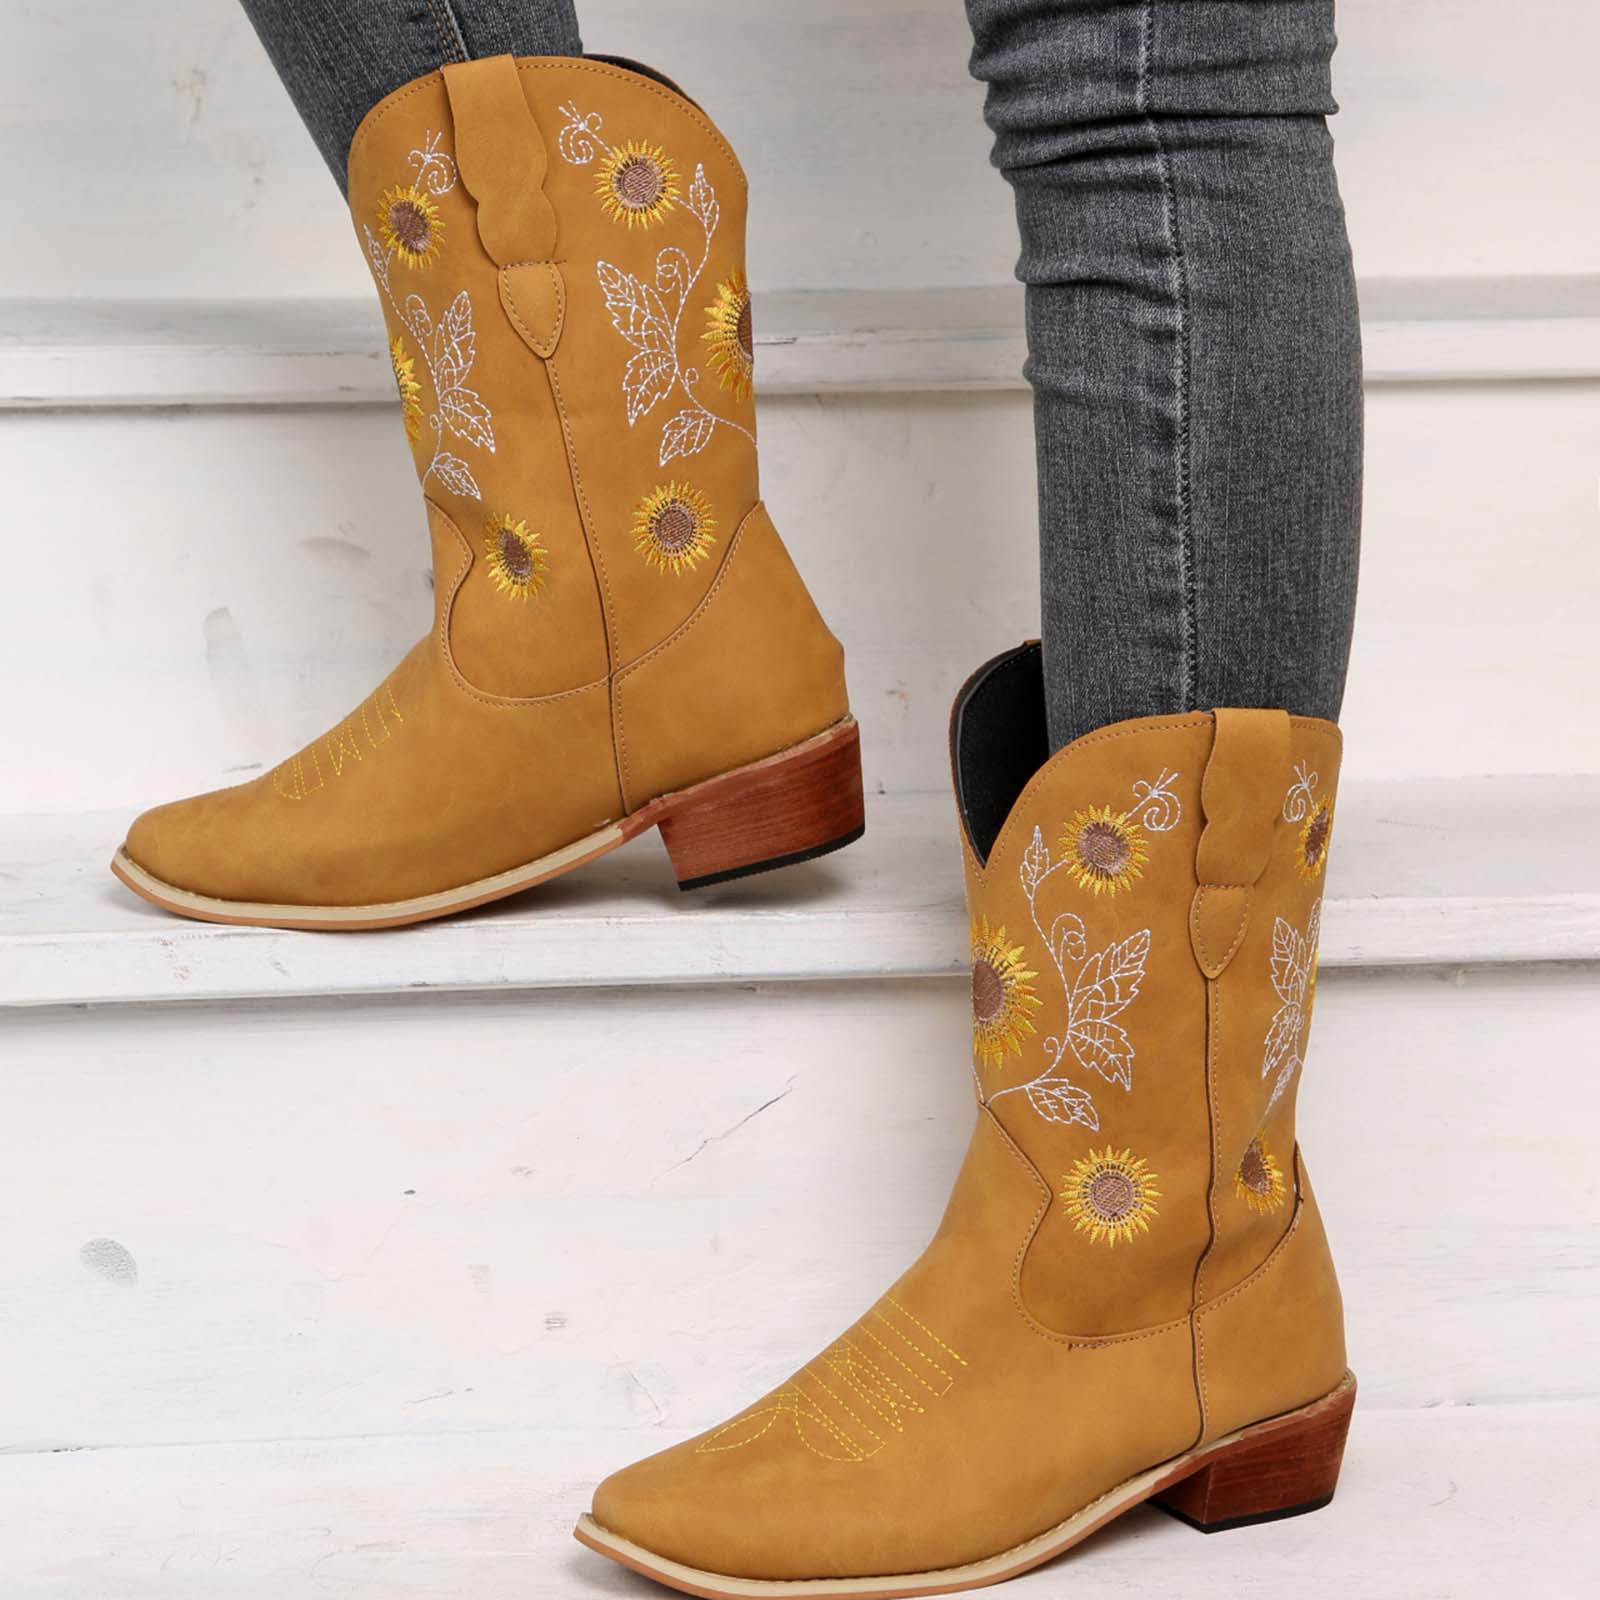 Casual Boots Sunflower Art Boots Spring Boots Classic Boot Sunflower Shoes Shoes Boys Shoes Boots All Season Boot Sunflower Boots Flower Custom Boot 